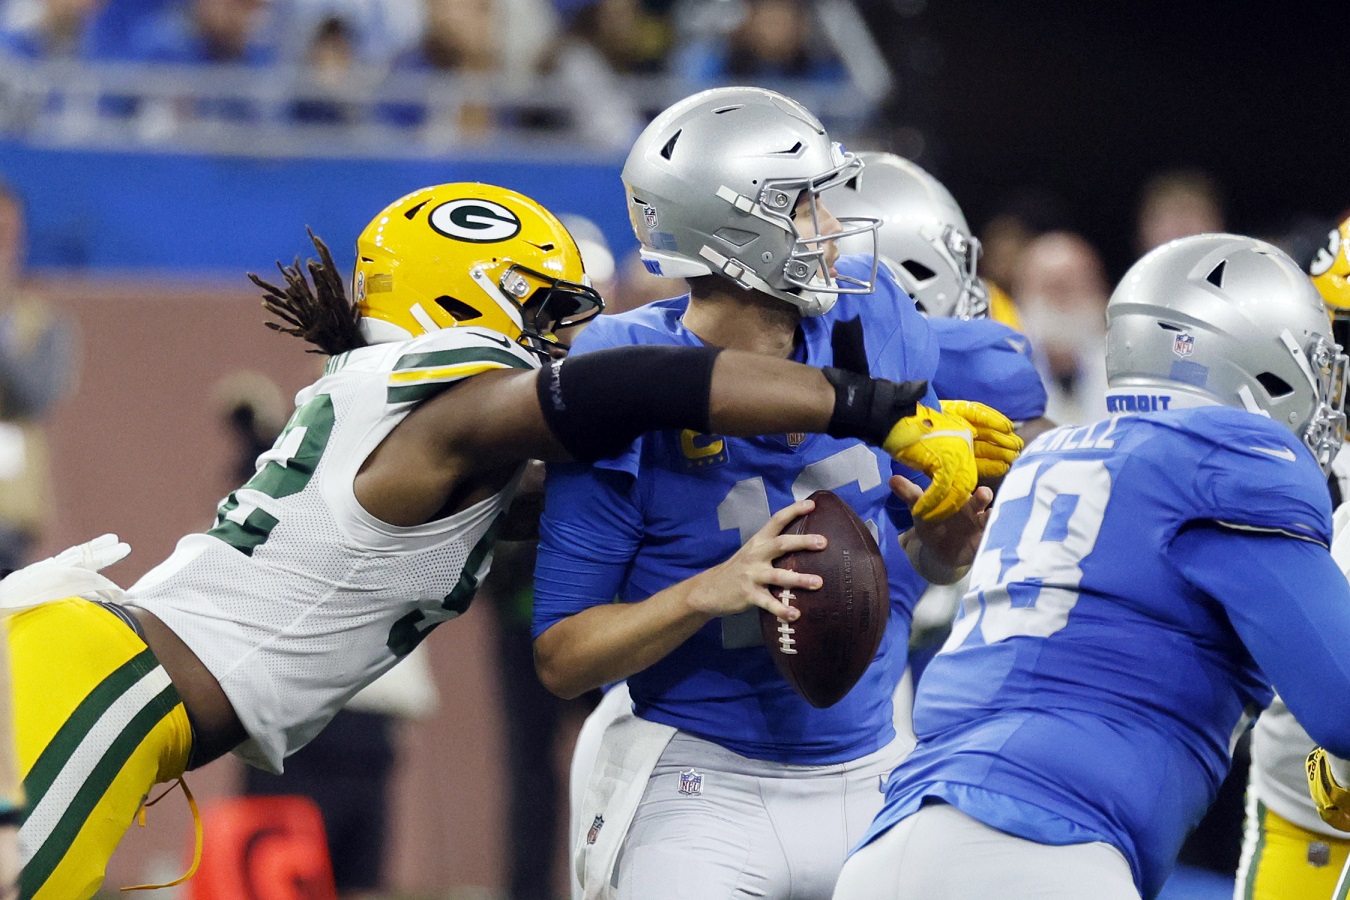 Love ties career high with 3 TD passes, leads Packers to win over NFC North-leading Lions